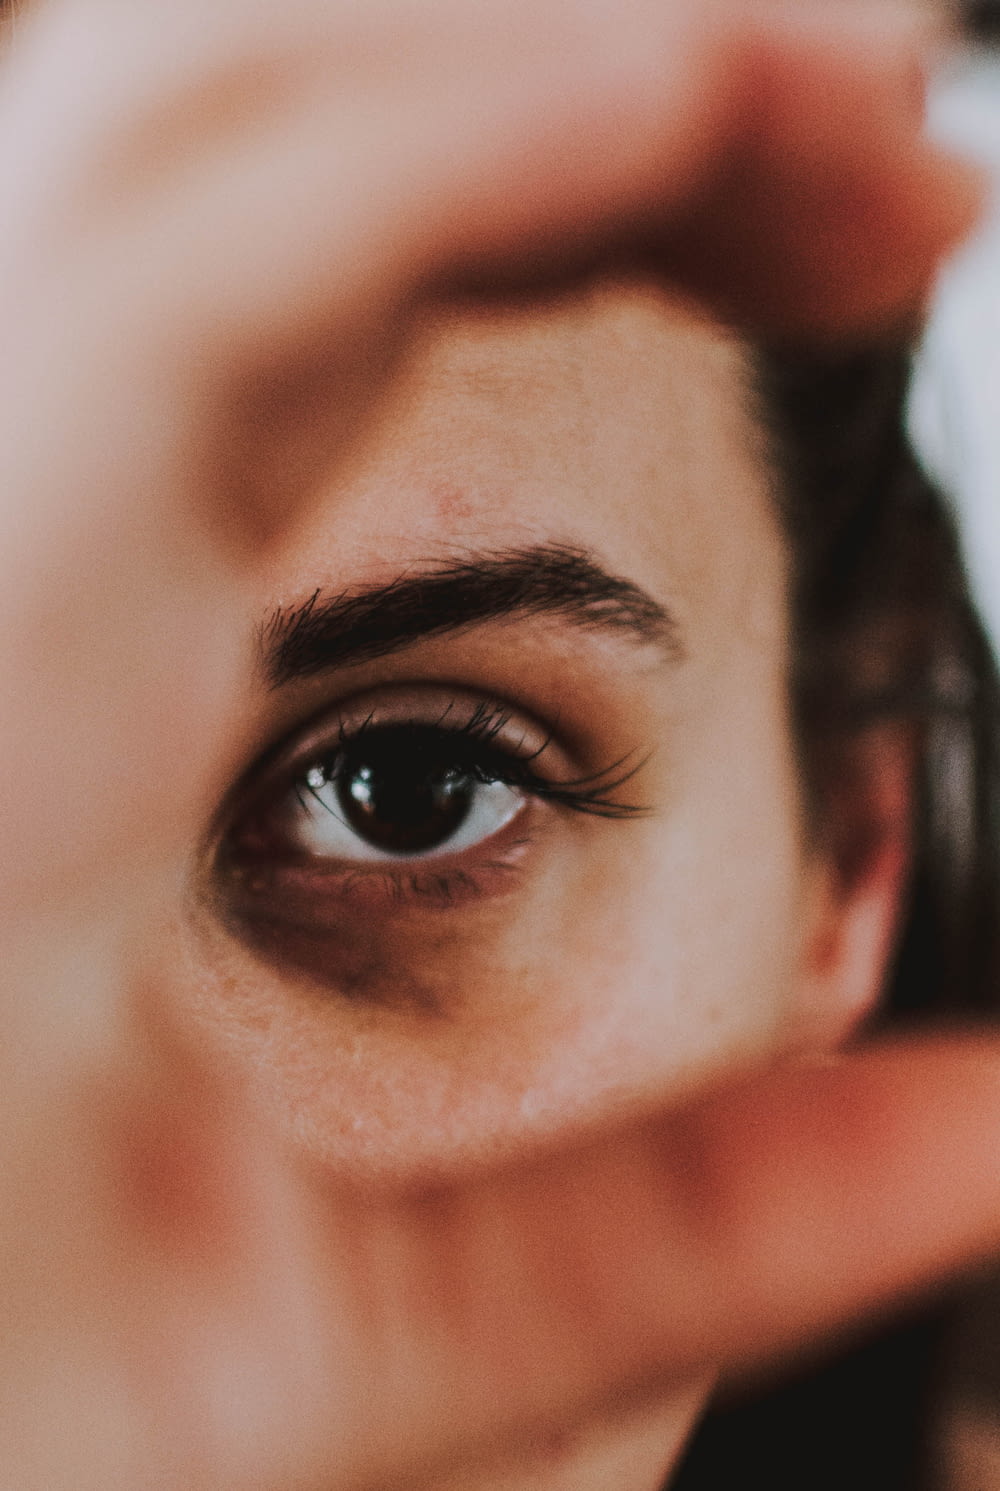 a close up of a person holding a cell phone to their eye